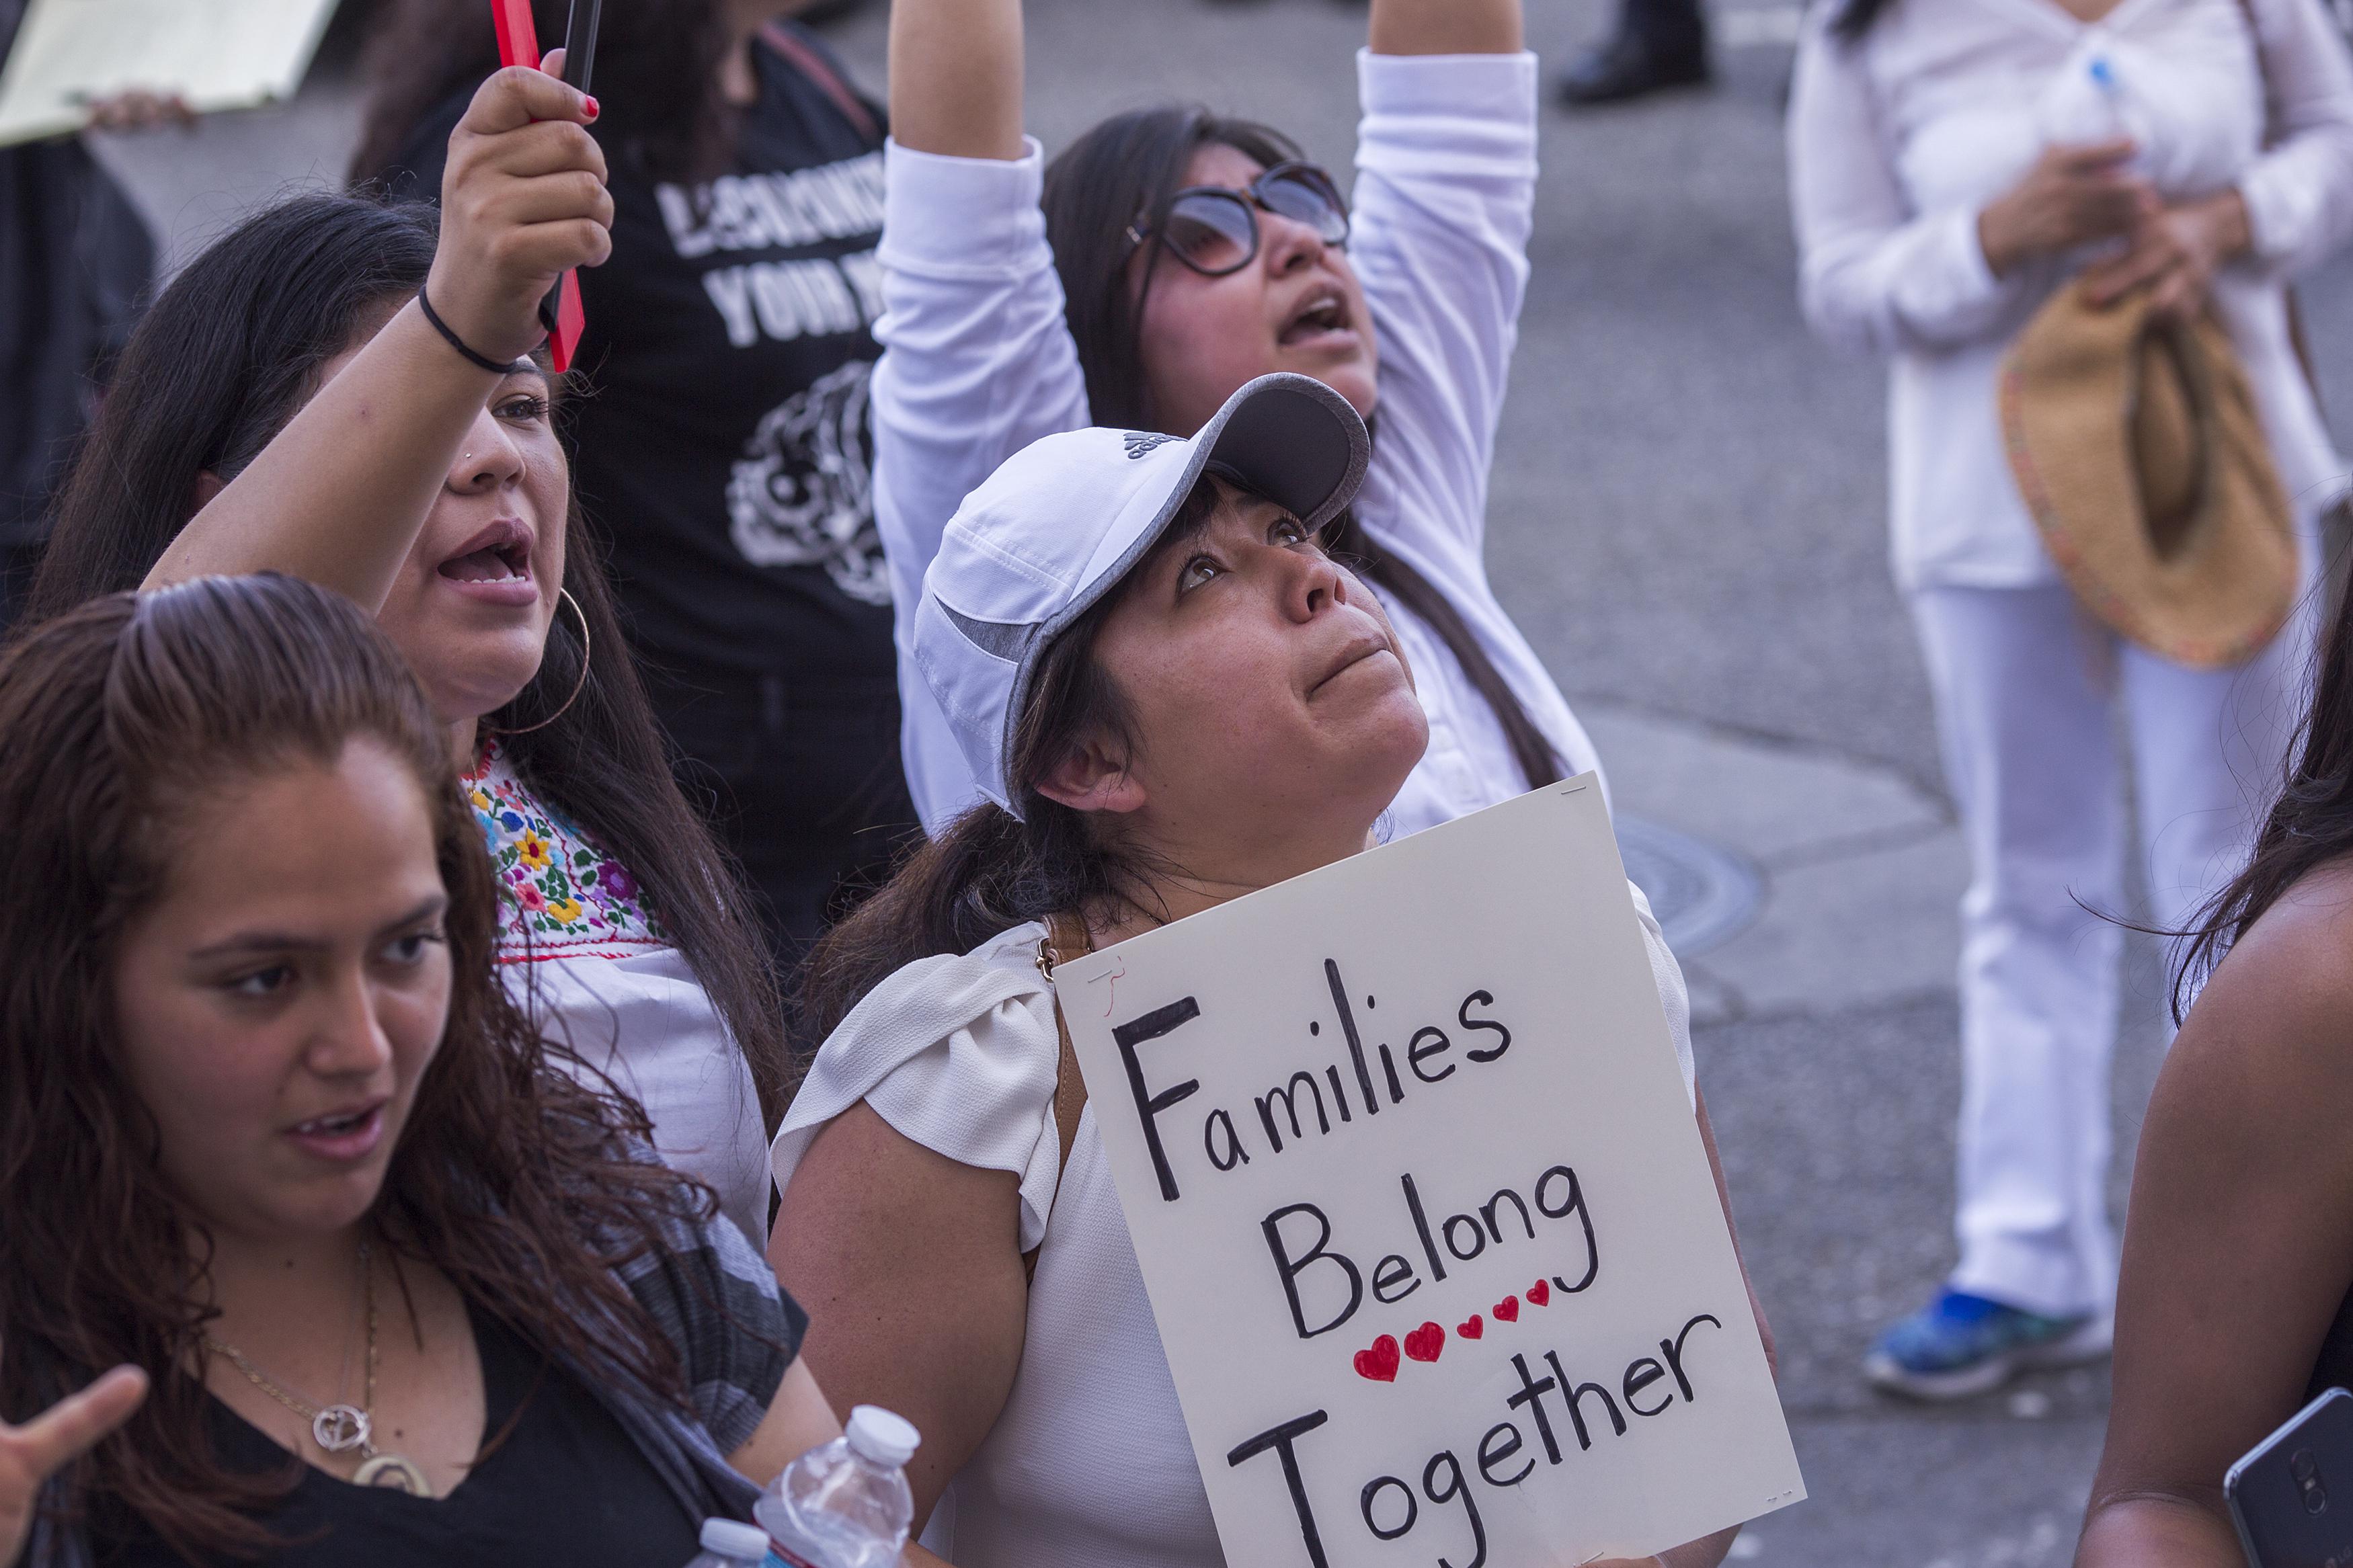 A crying woman holds a sign that reads "Families belong together."